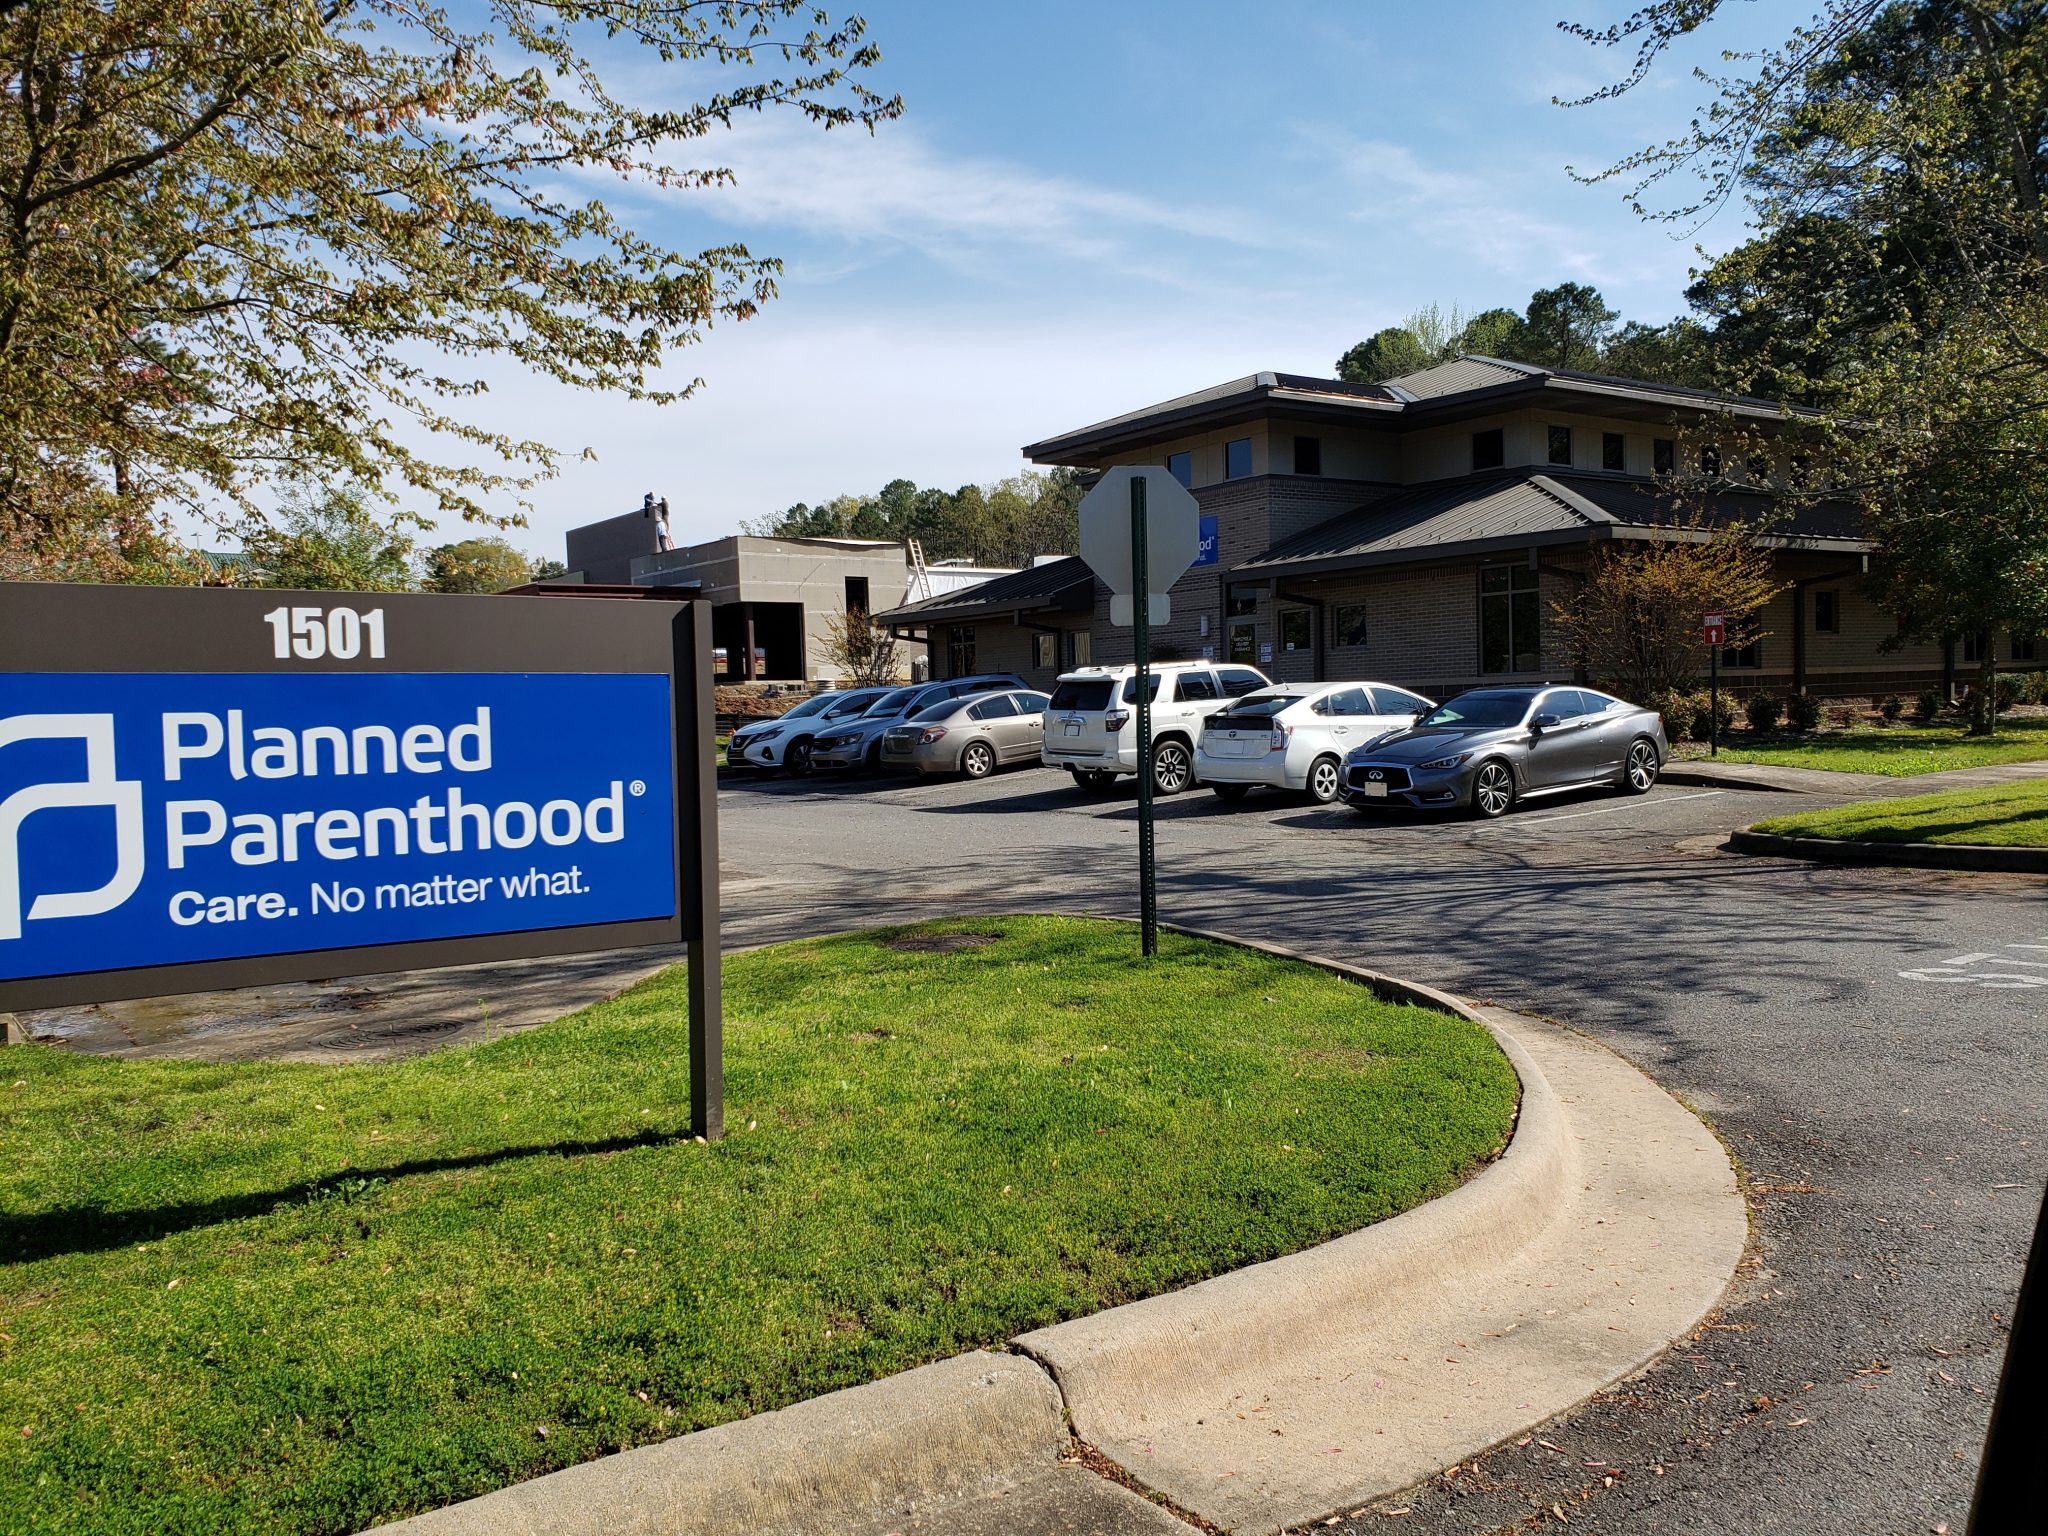 Bayer Gives Planned Parenthood Clinic in Little Rock 40K